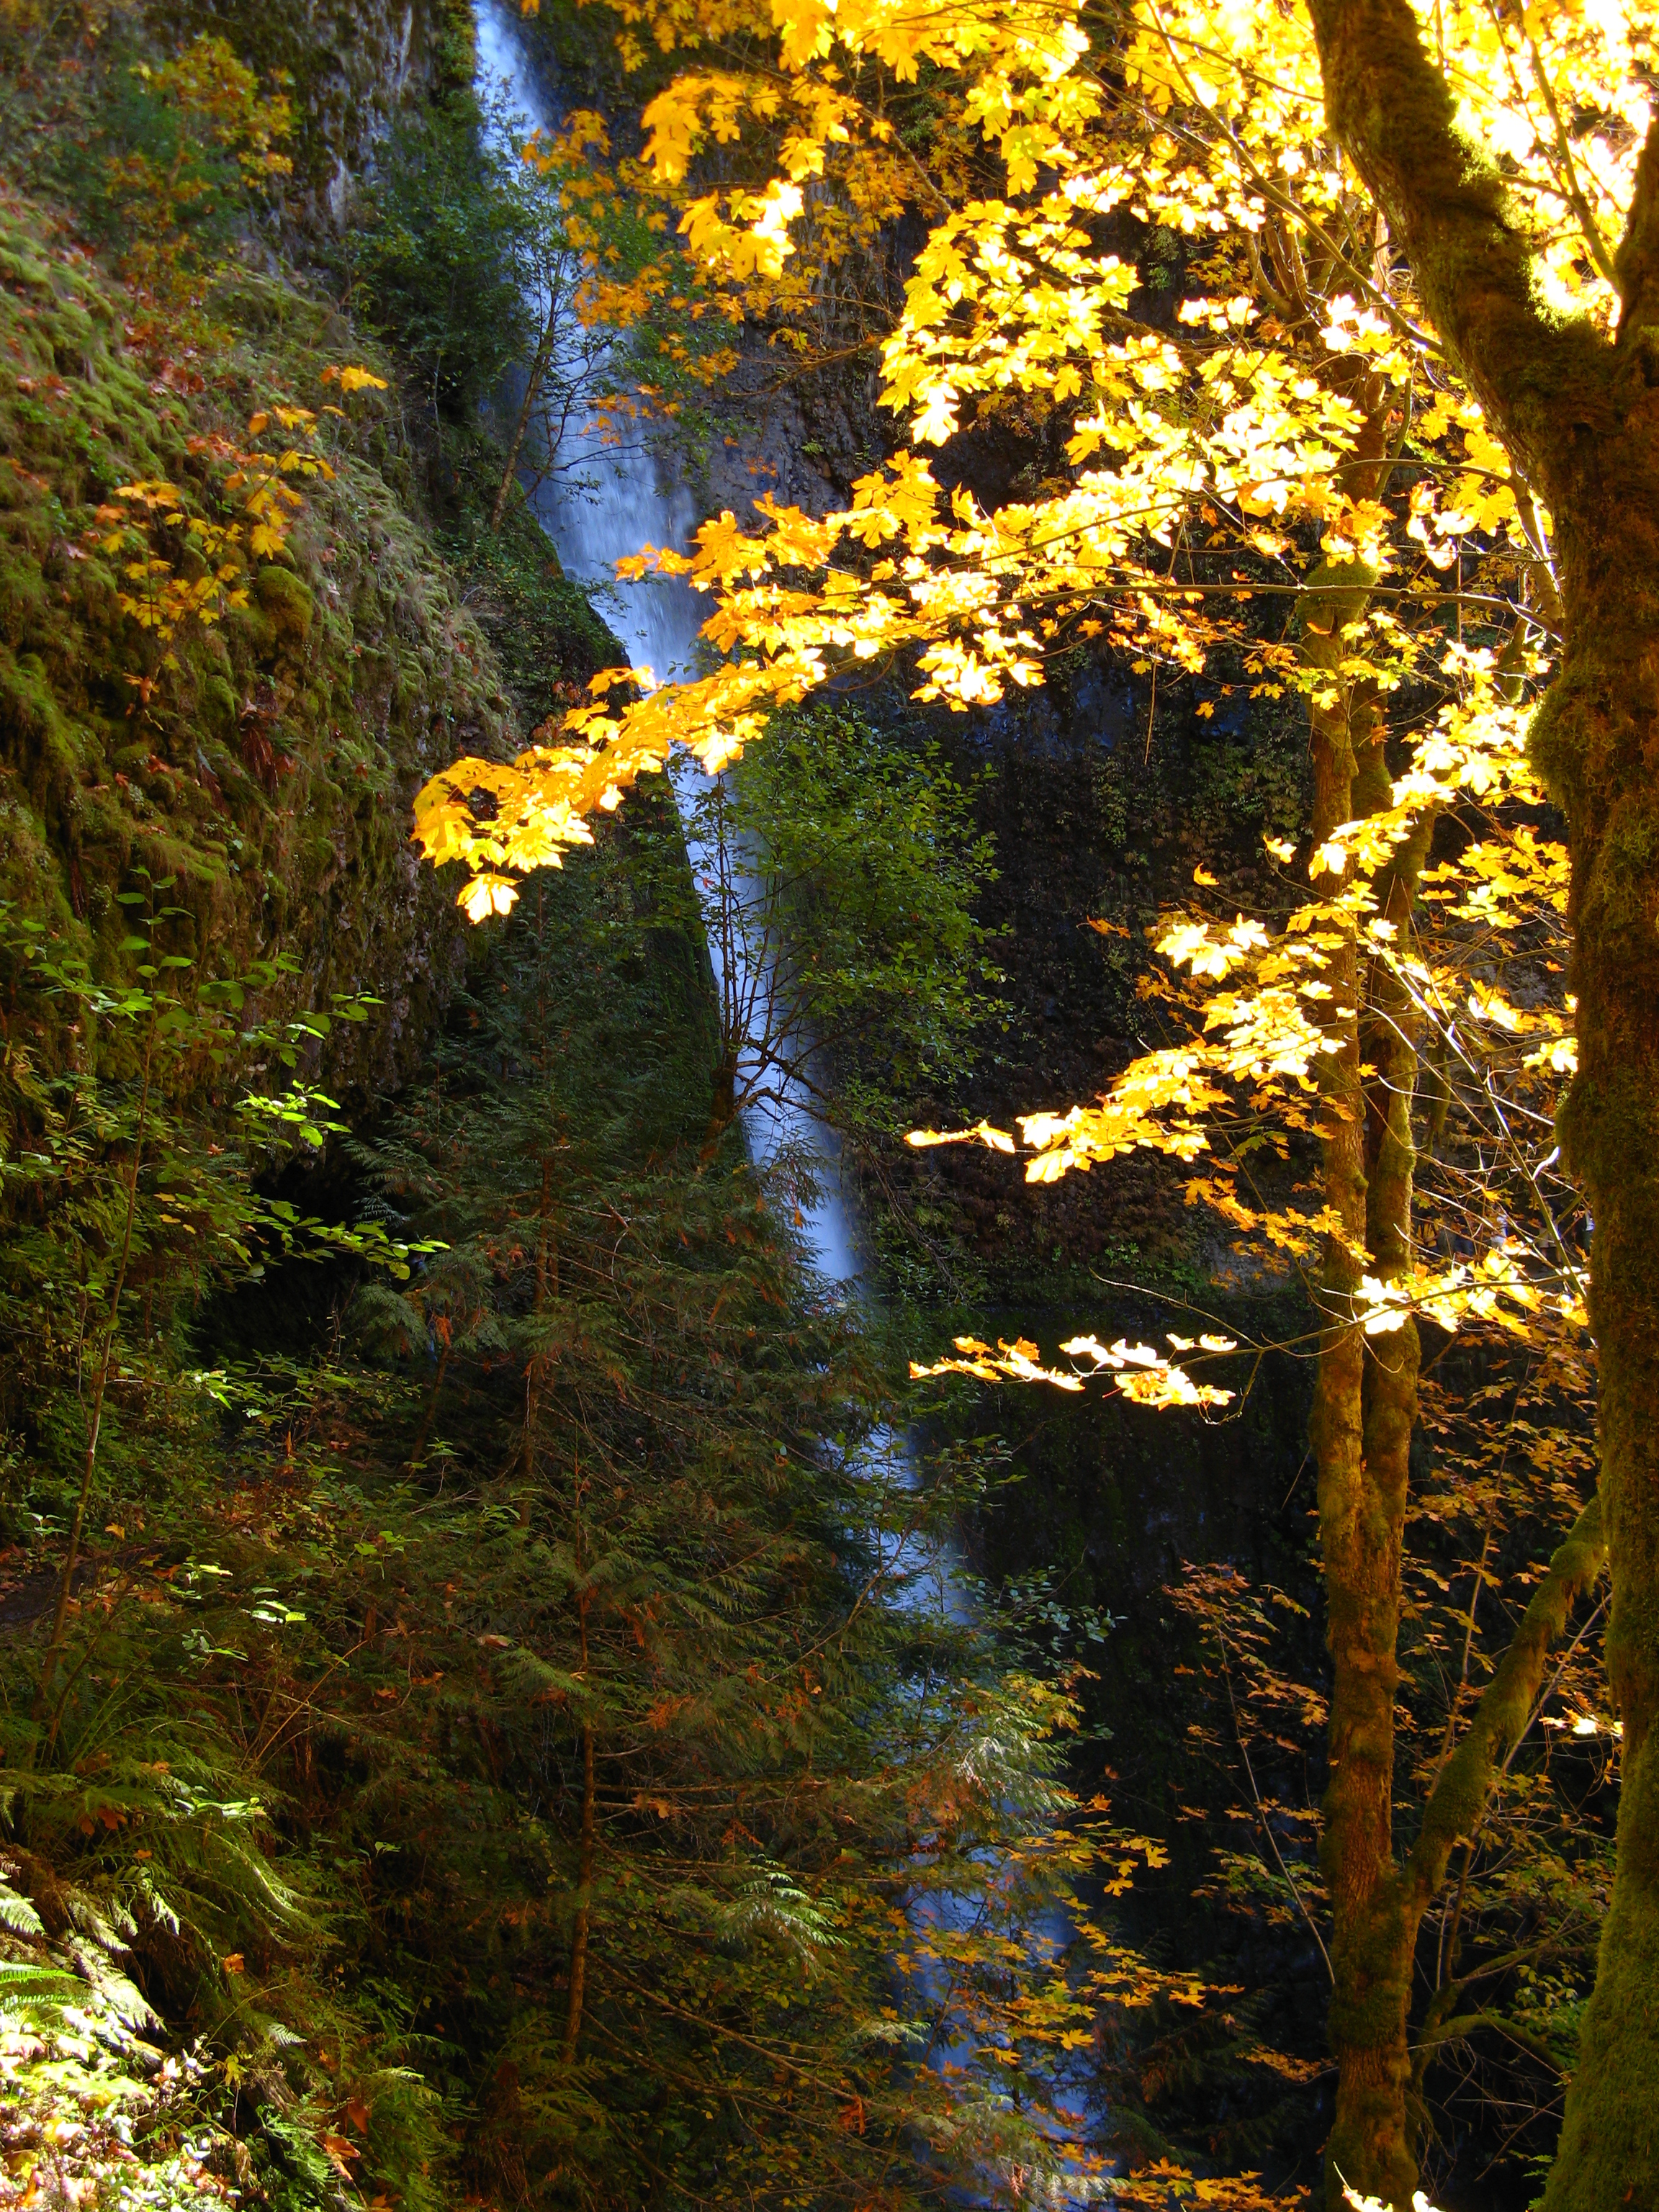 Tunnel Falls, Tunnel Entrance, and Leaves